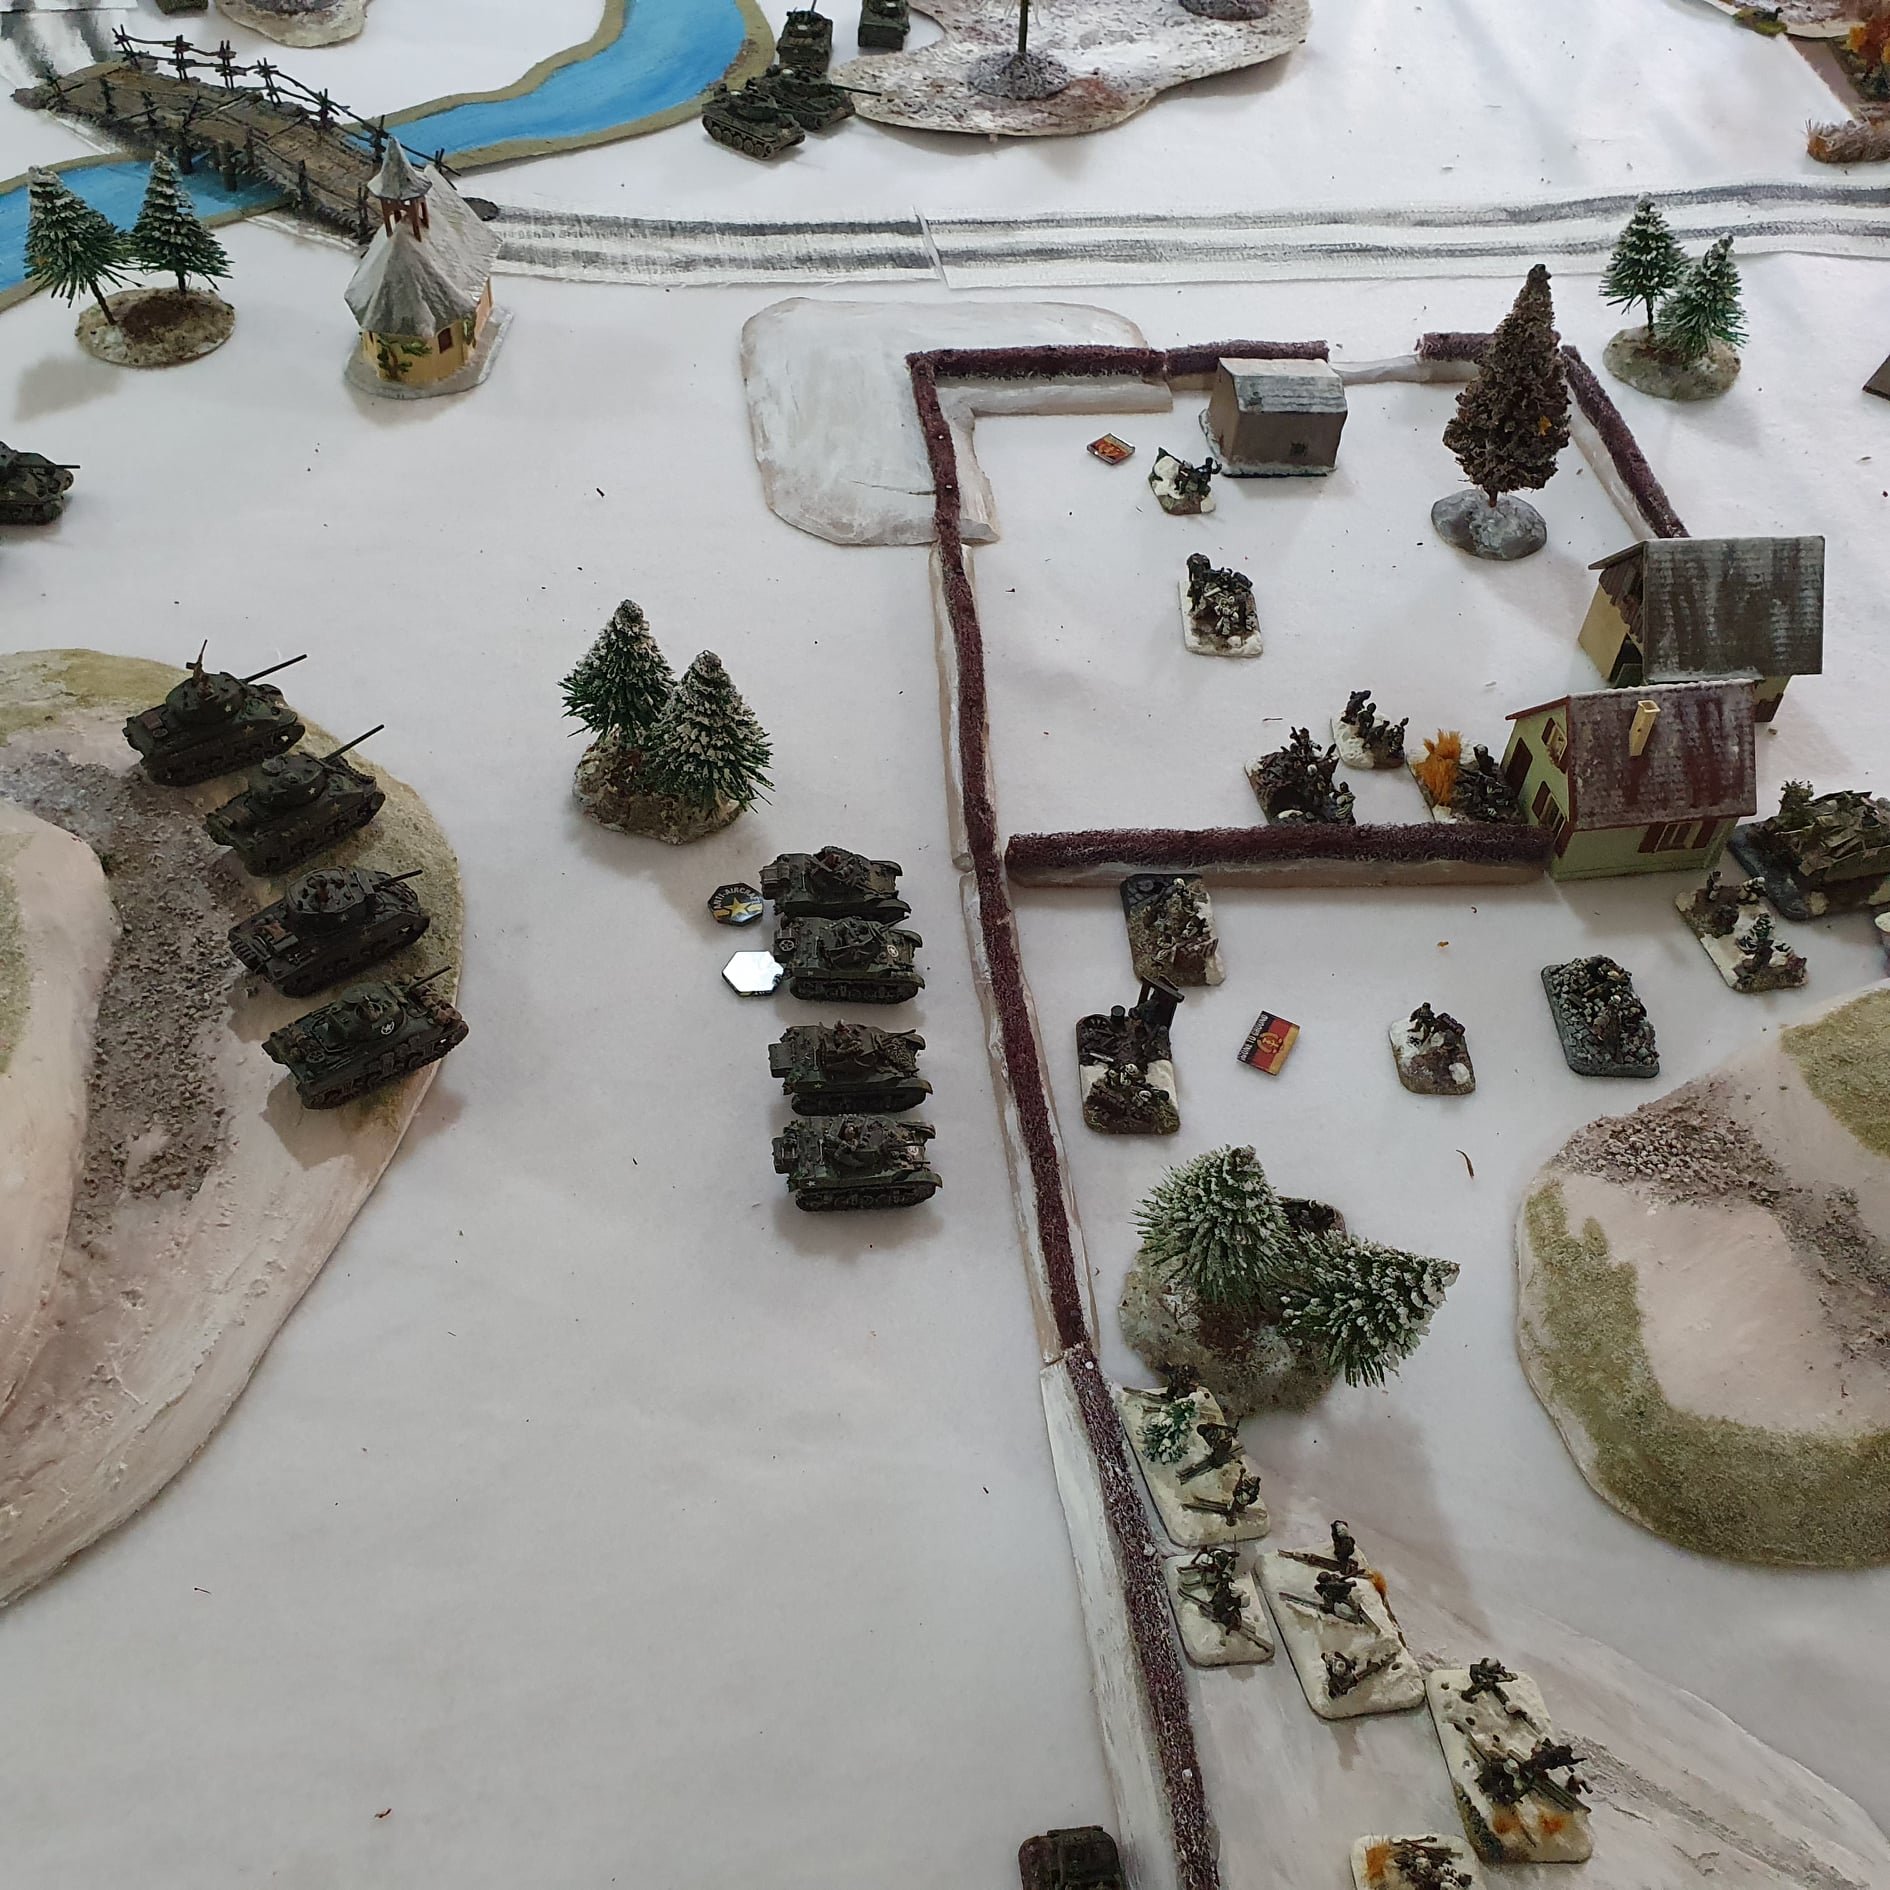  Flames of War: The Americans assault German positions in the Winter of ‘44 